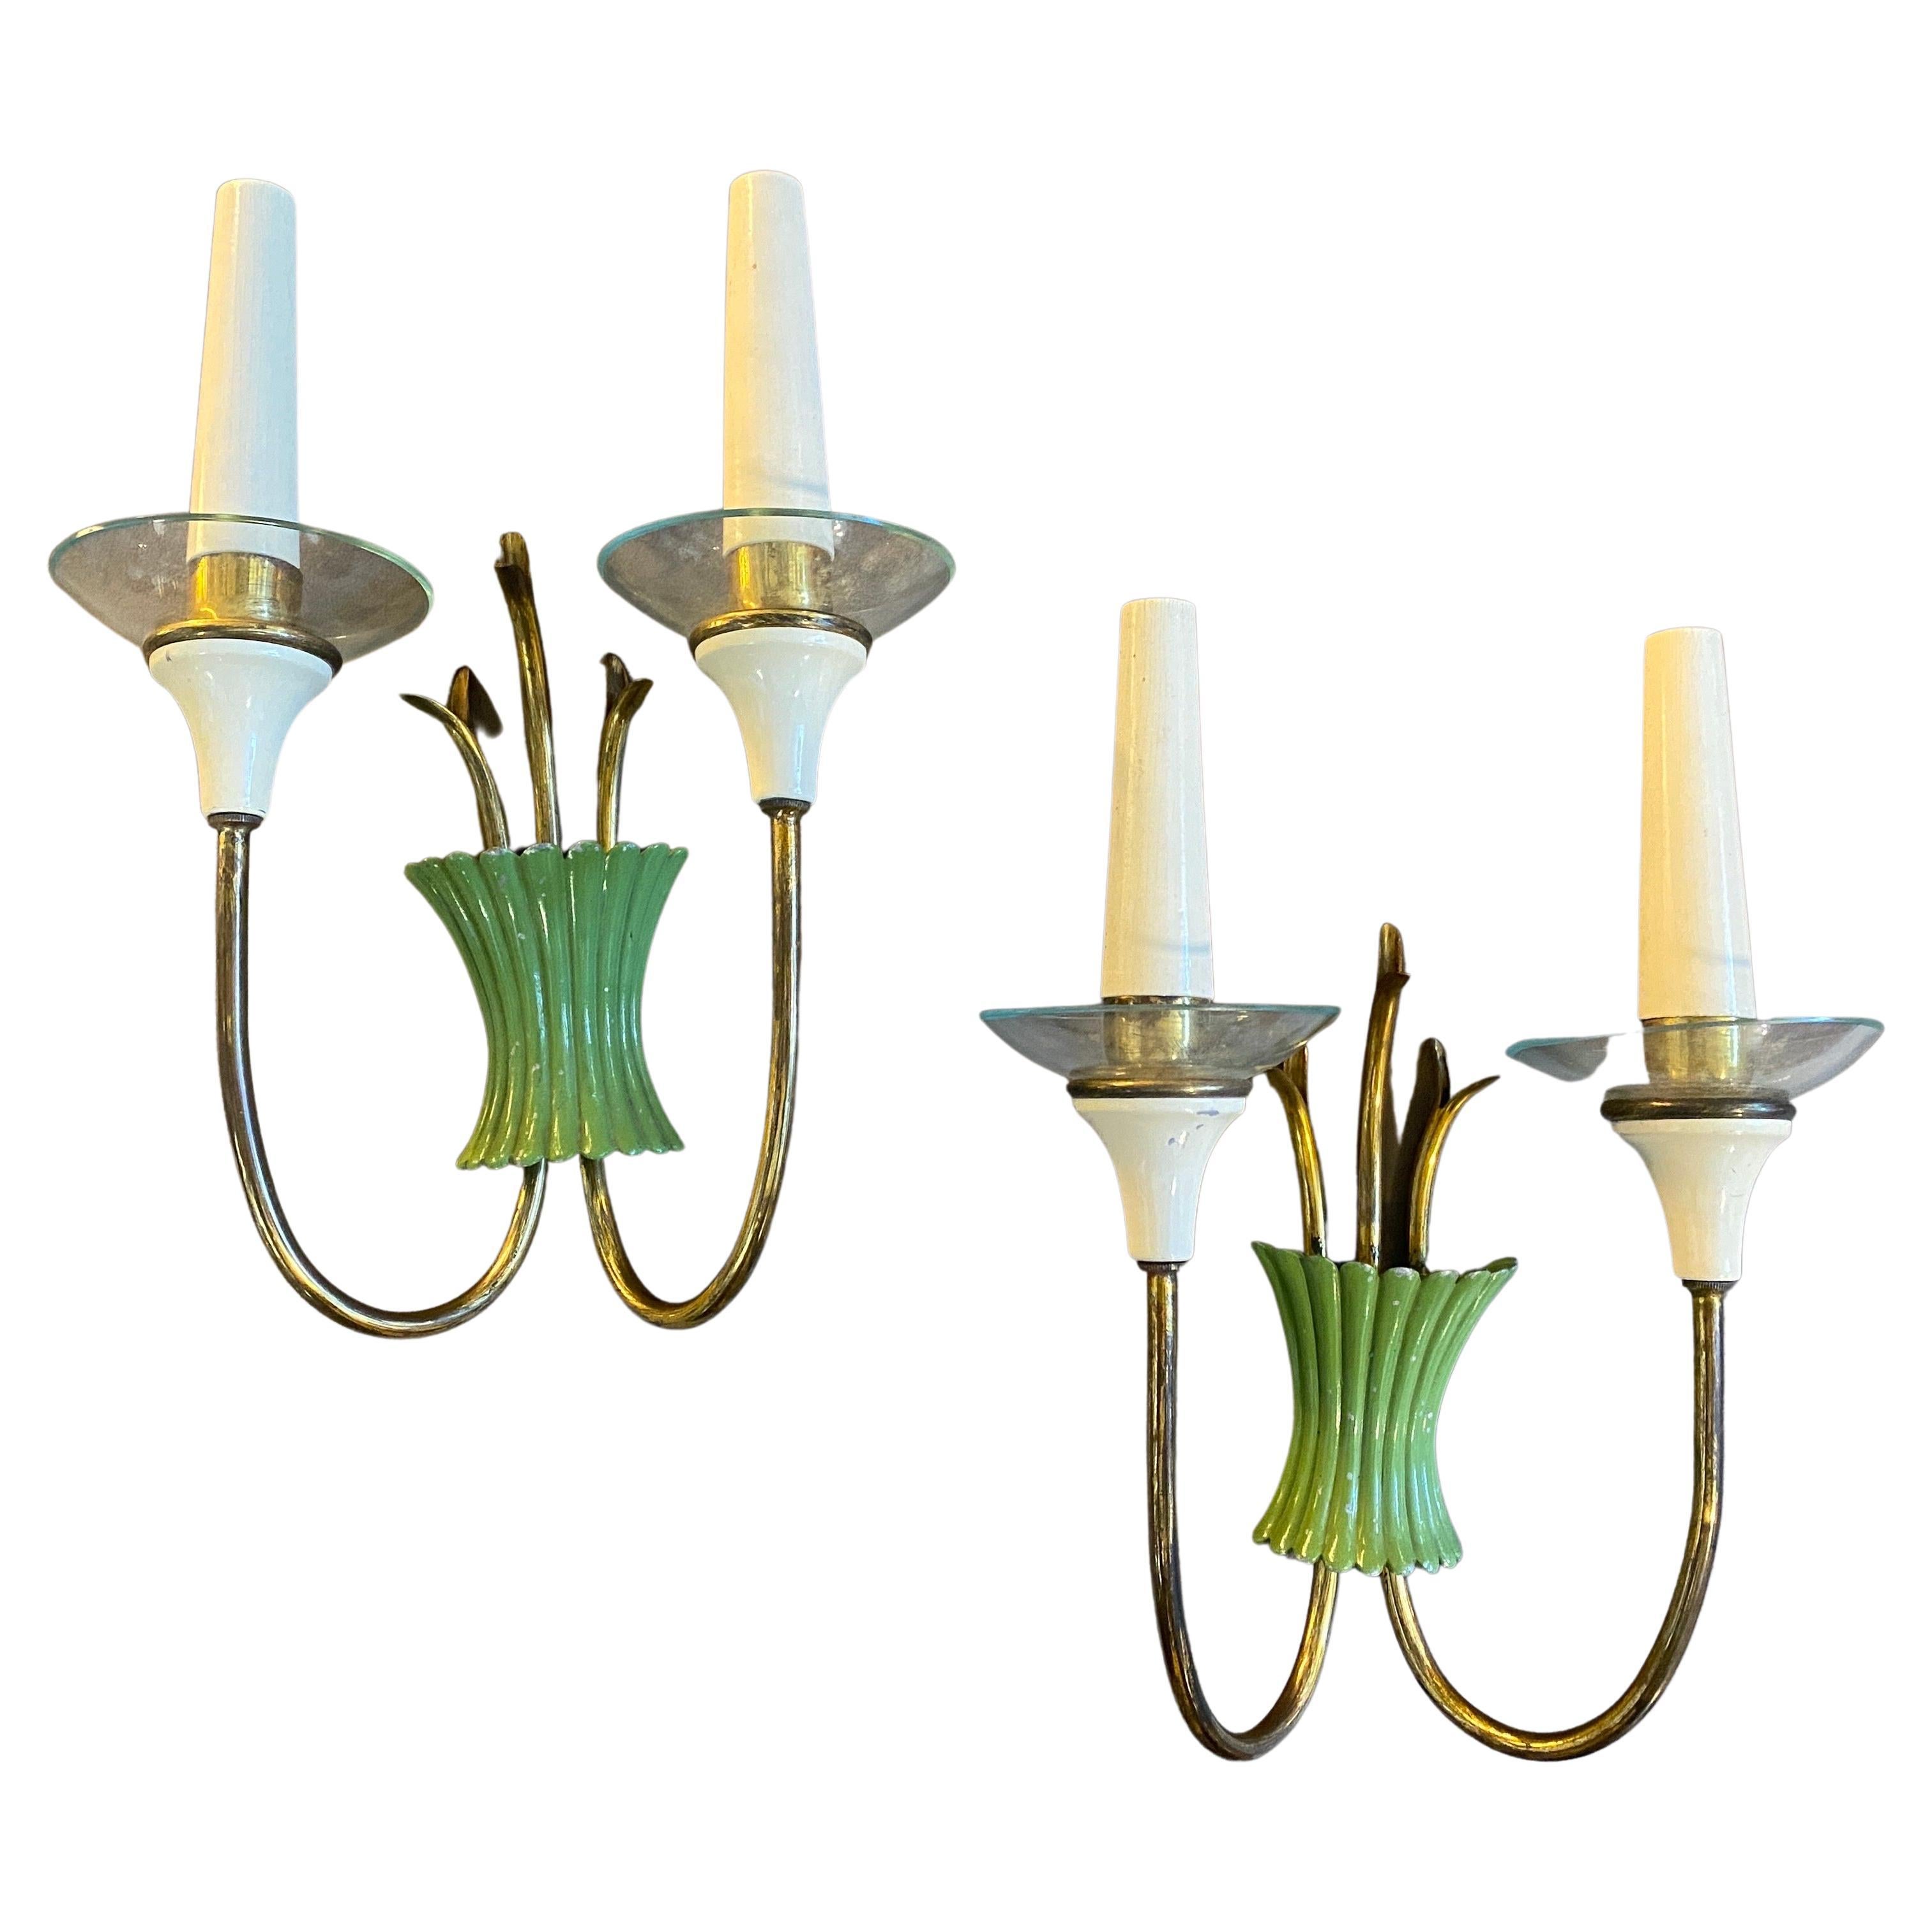 Two 1950s Mid-Century Modern Brass, Green Metal and Glass Italian Wall Sconces